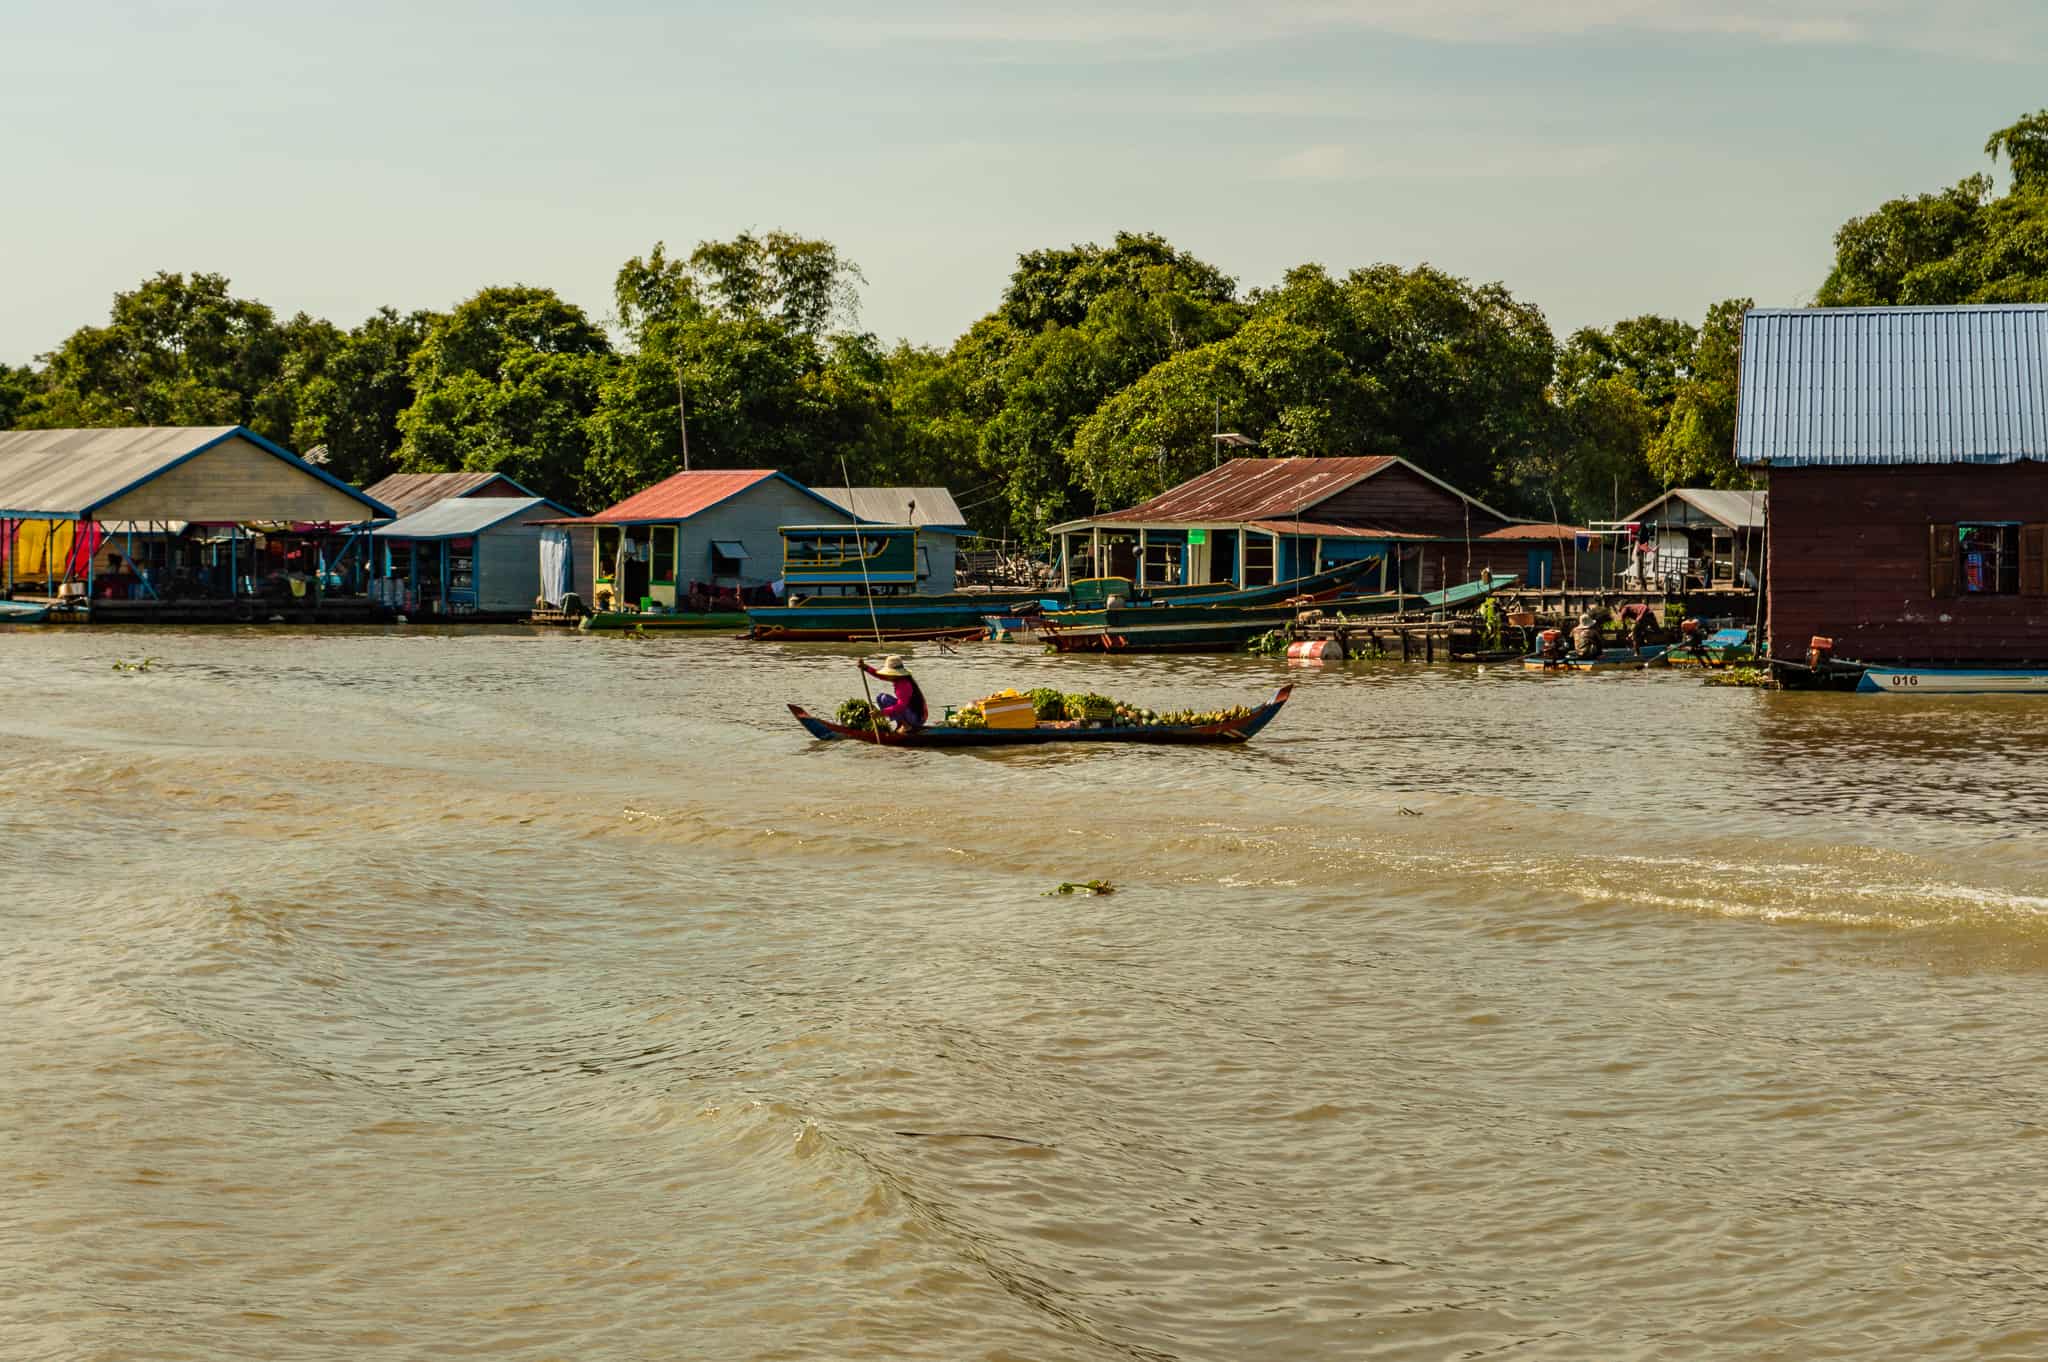 Floating villages along the Siem Reap river, Cambodia